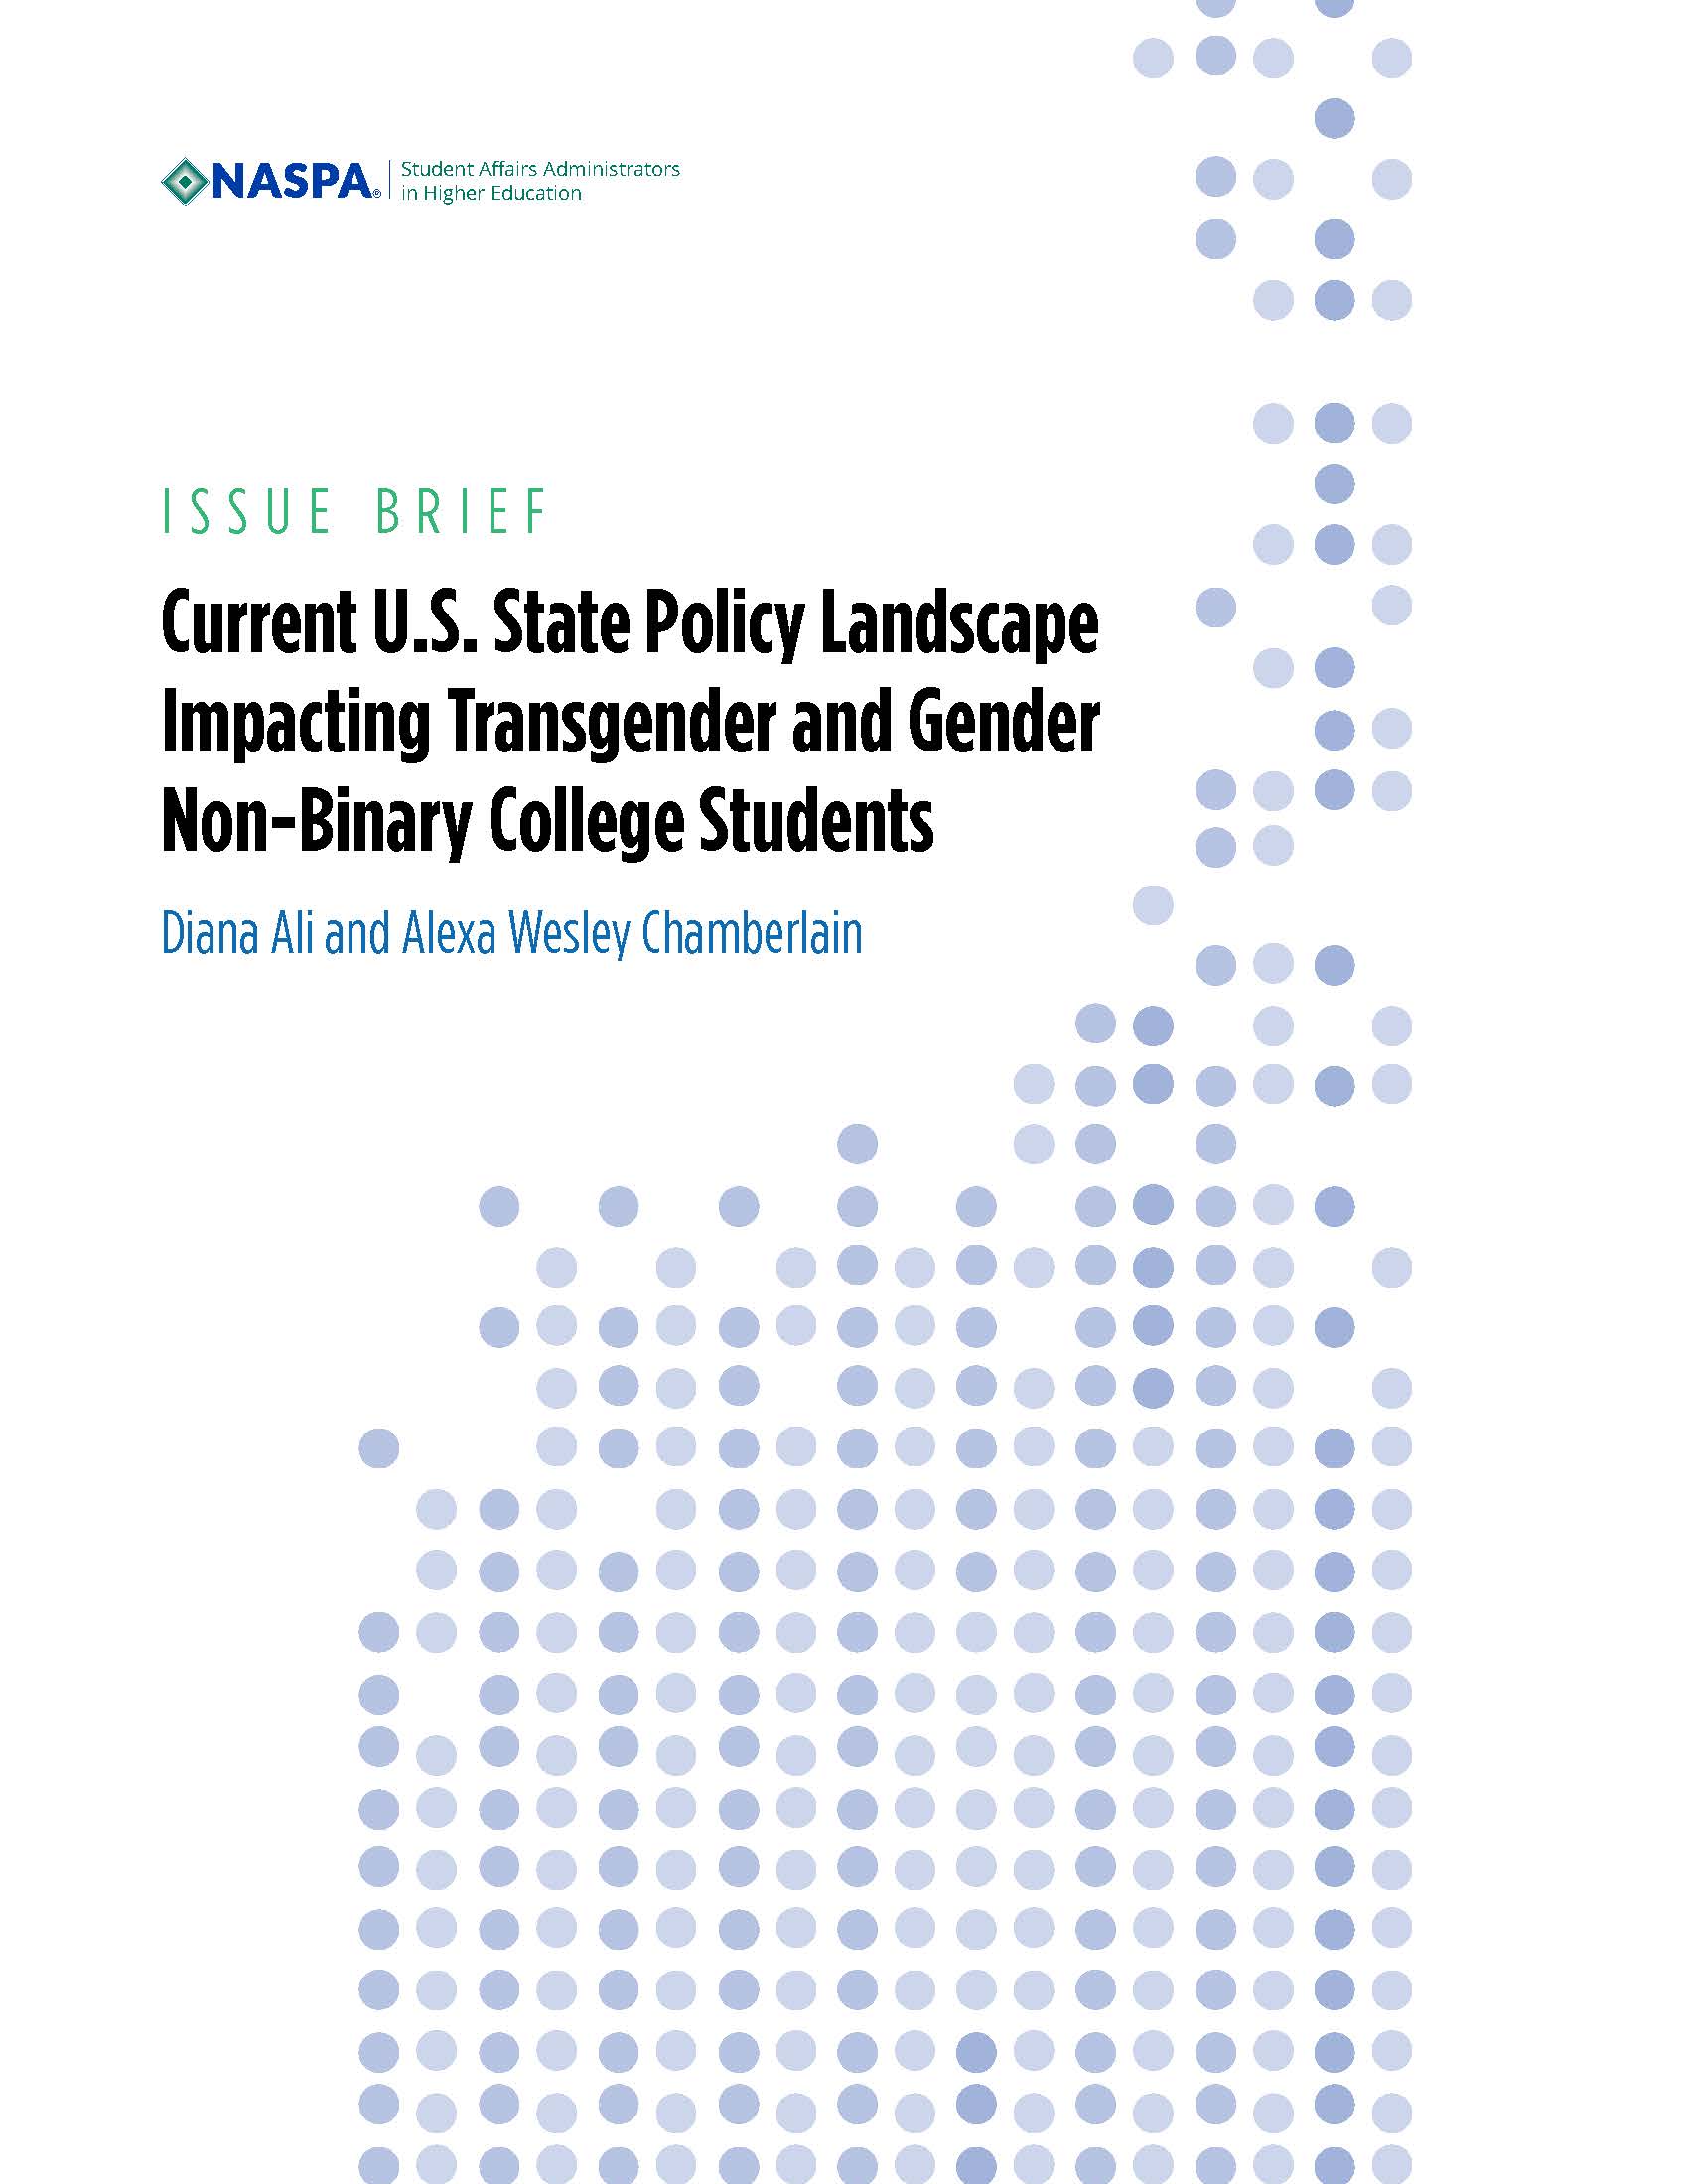 Current U.S. State Policy Landscape Impacting Transgender and Gender Non-Binary Students Cover